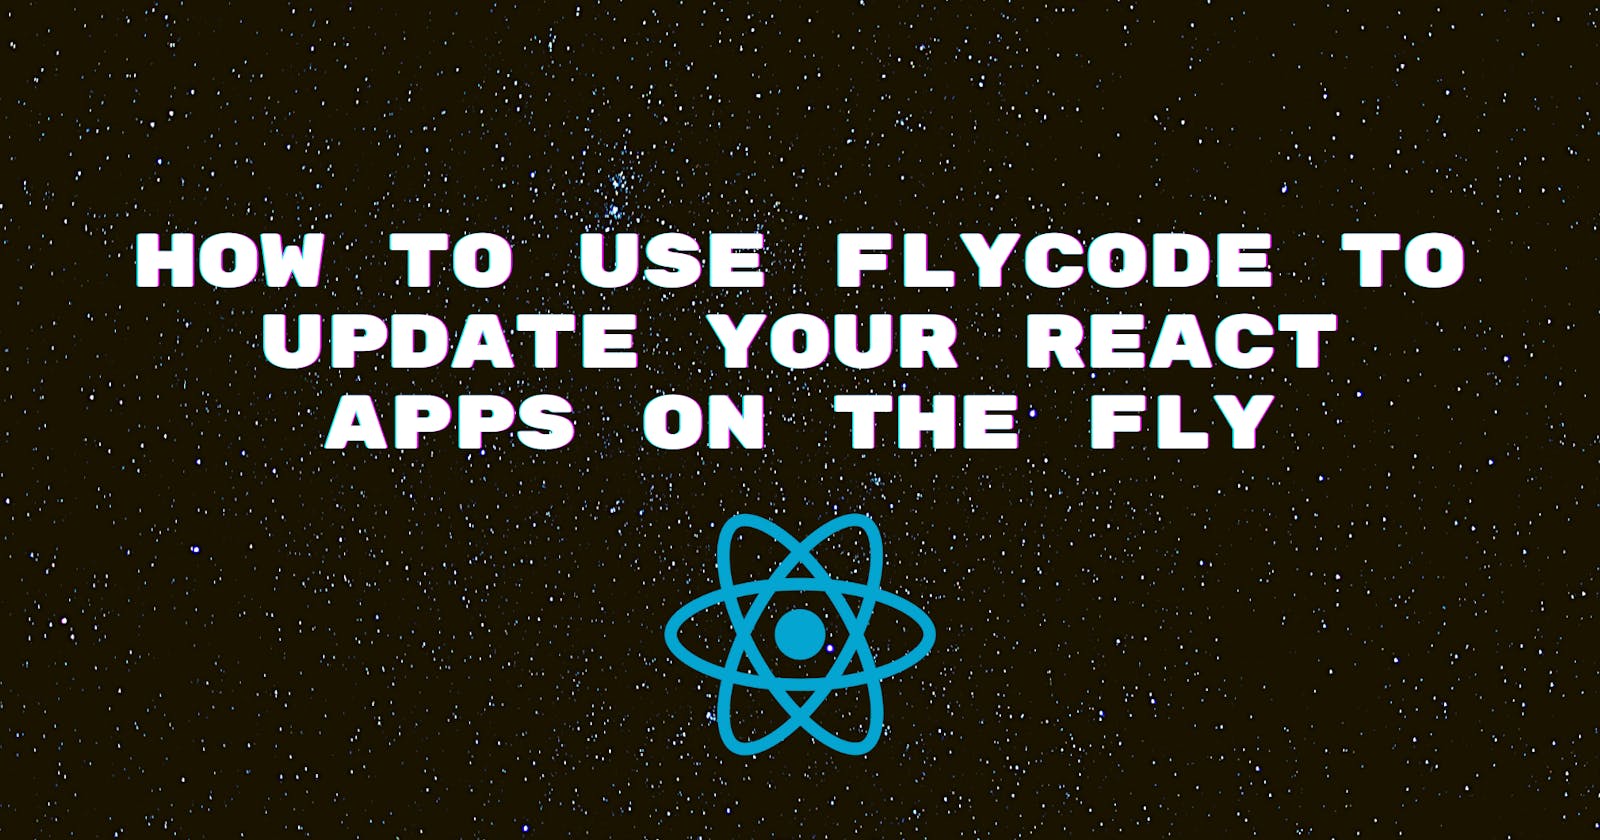 How to use FlyCode to update your React apps on the fly